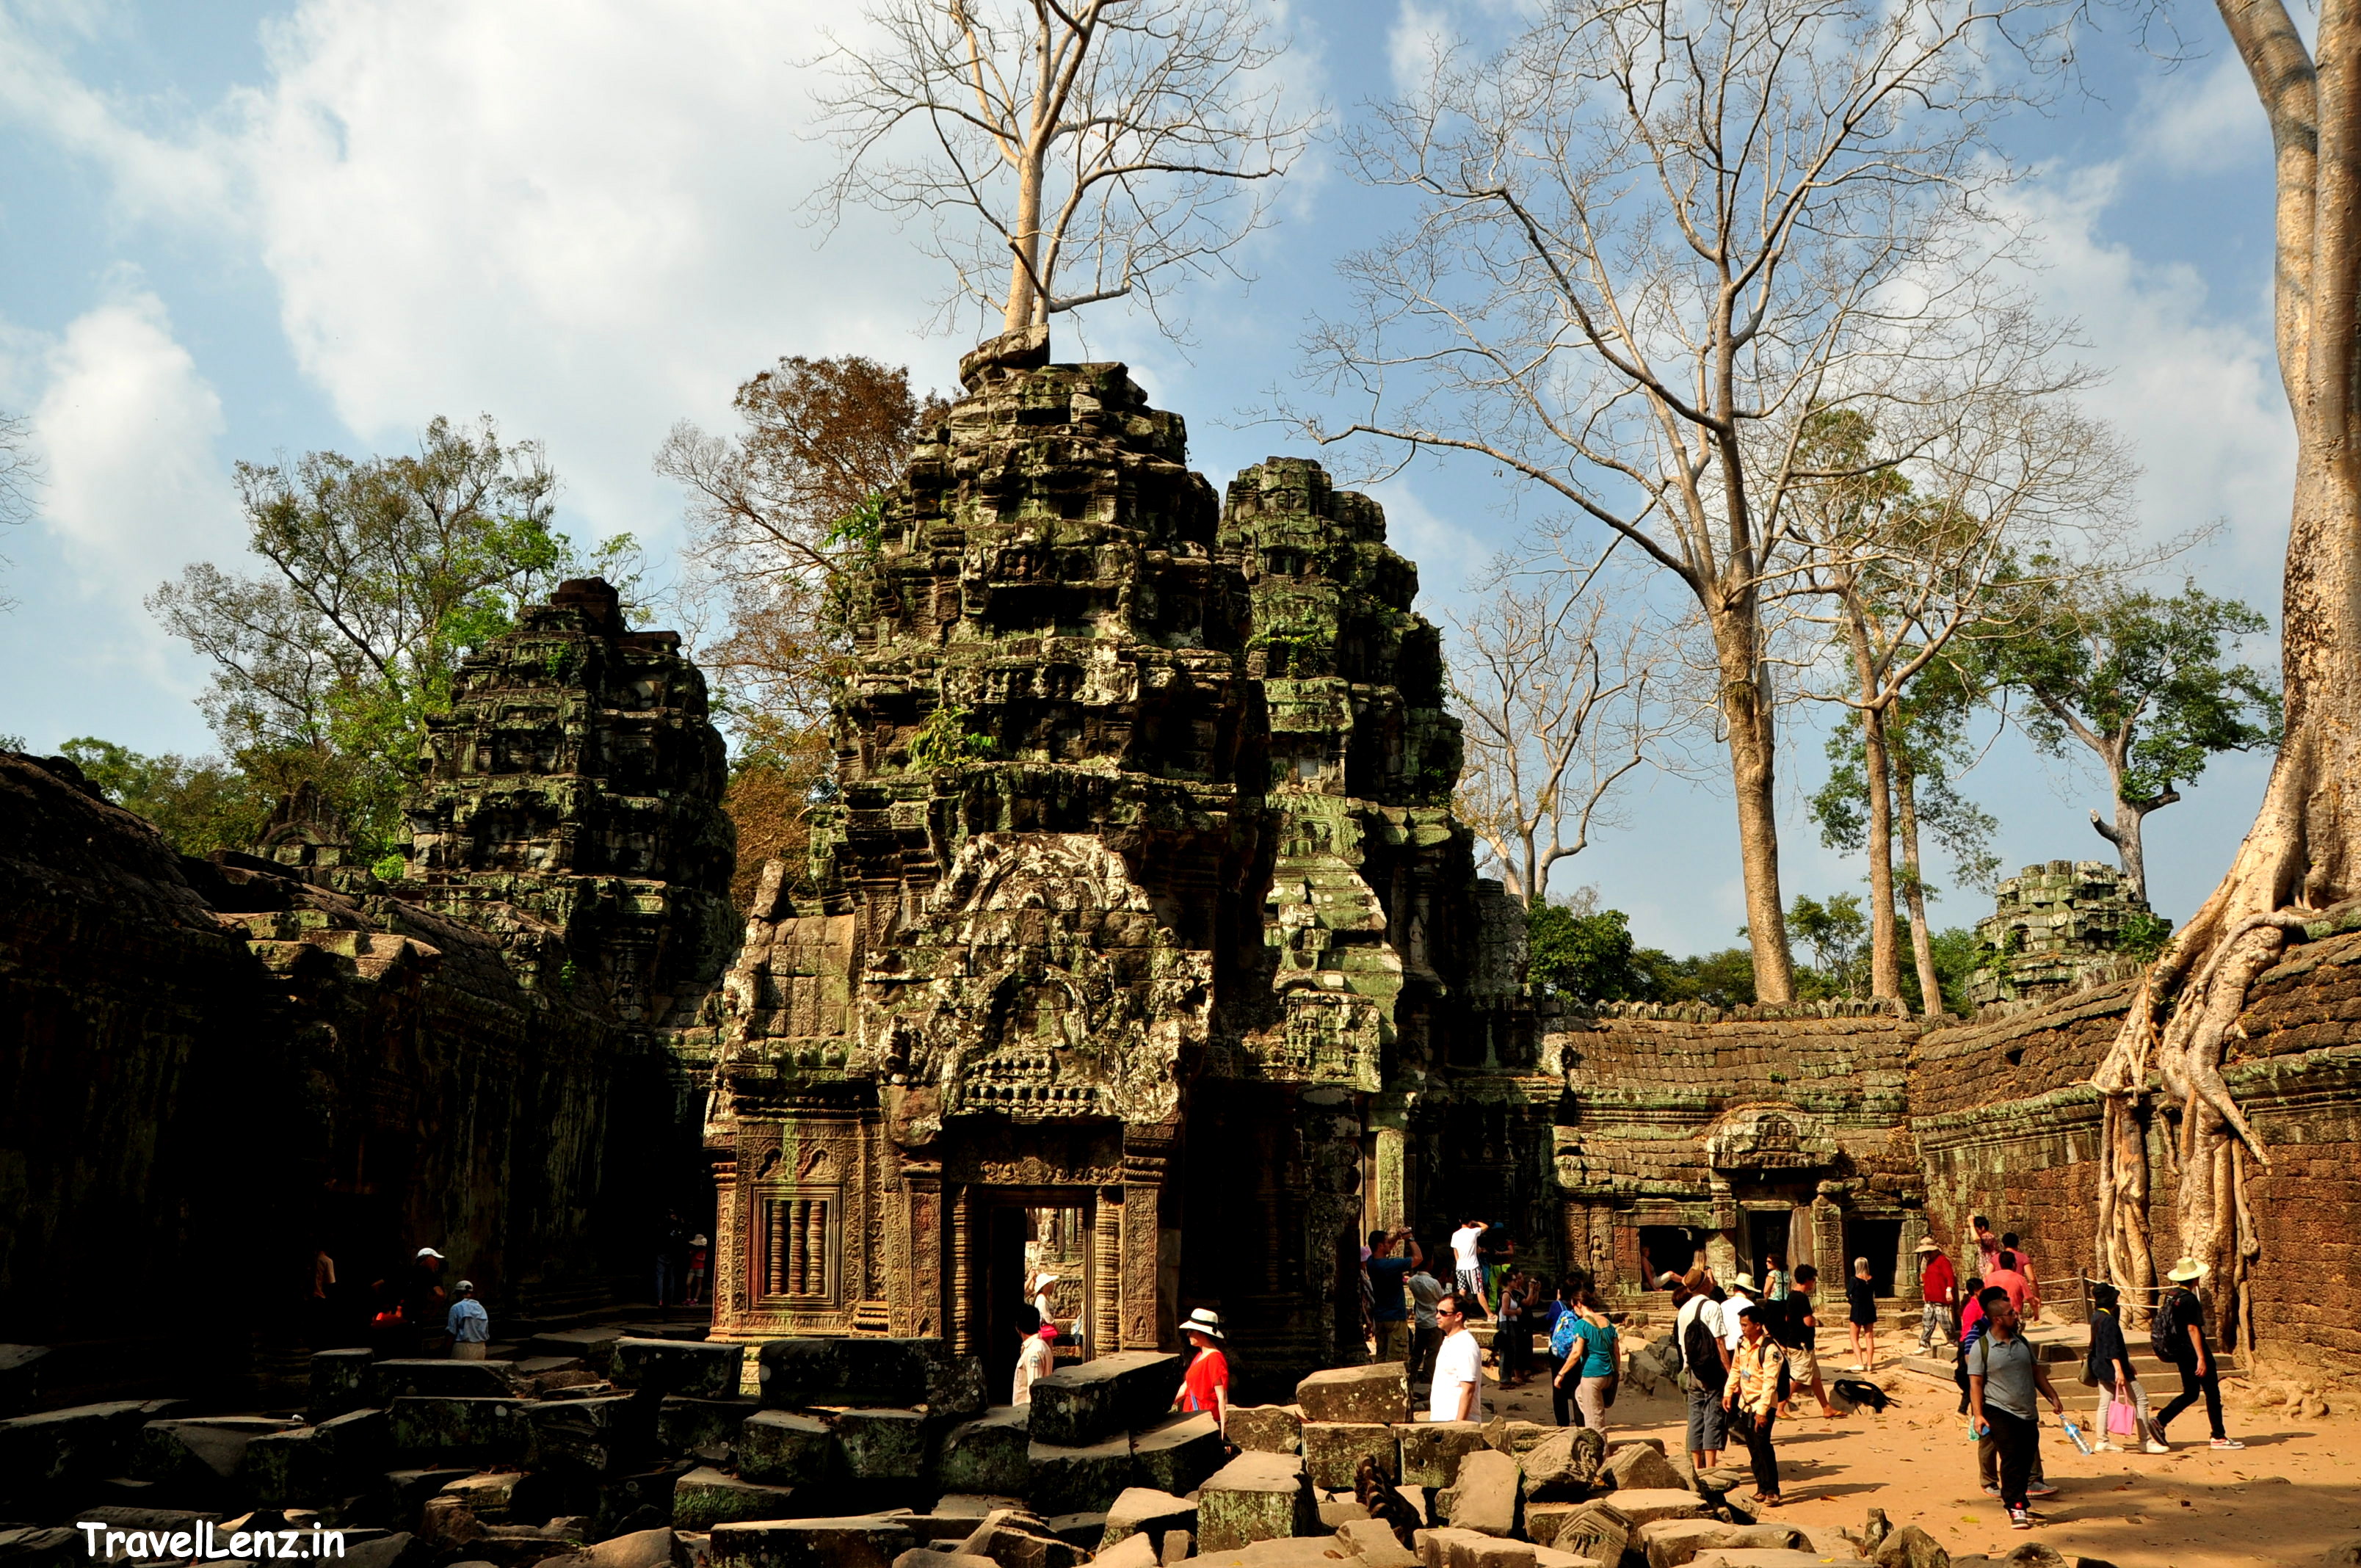 One of the towers at Ta Prohm